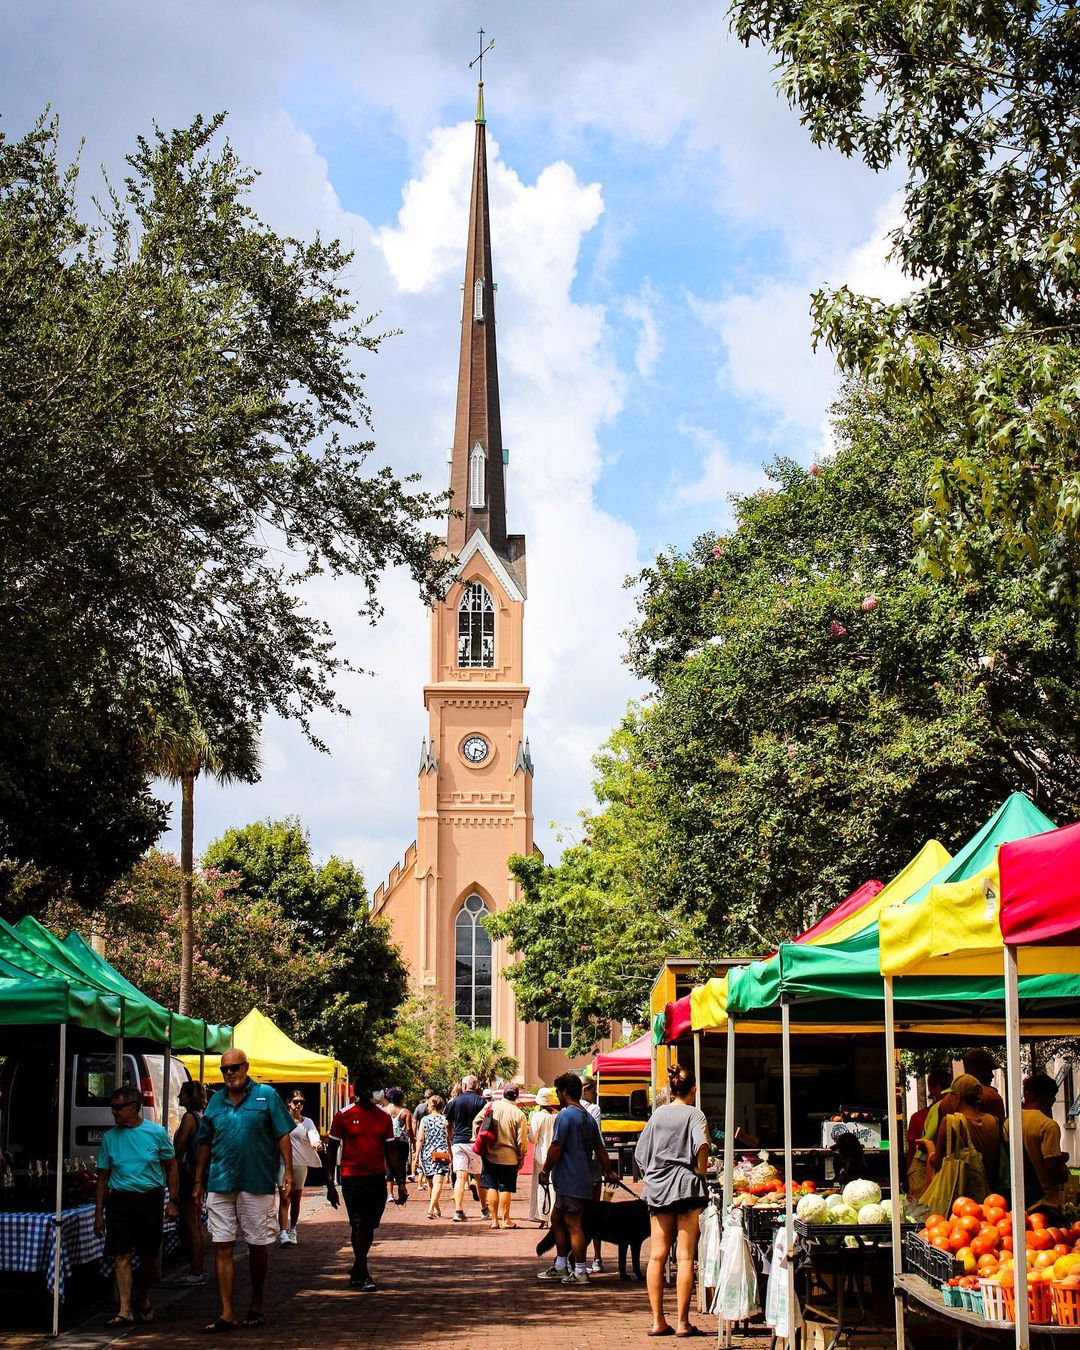 People gathered at a farmer's market in Charleston. Photo by Instagram user @gbmomentscapturedtogether 